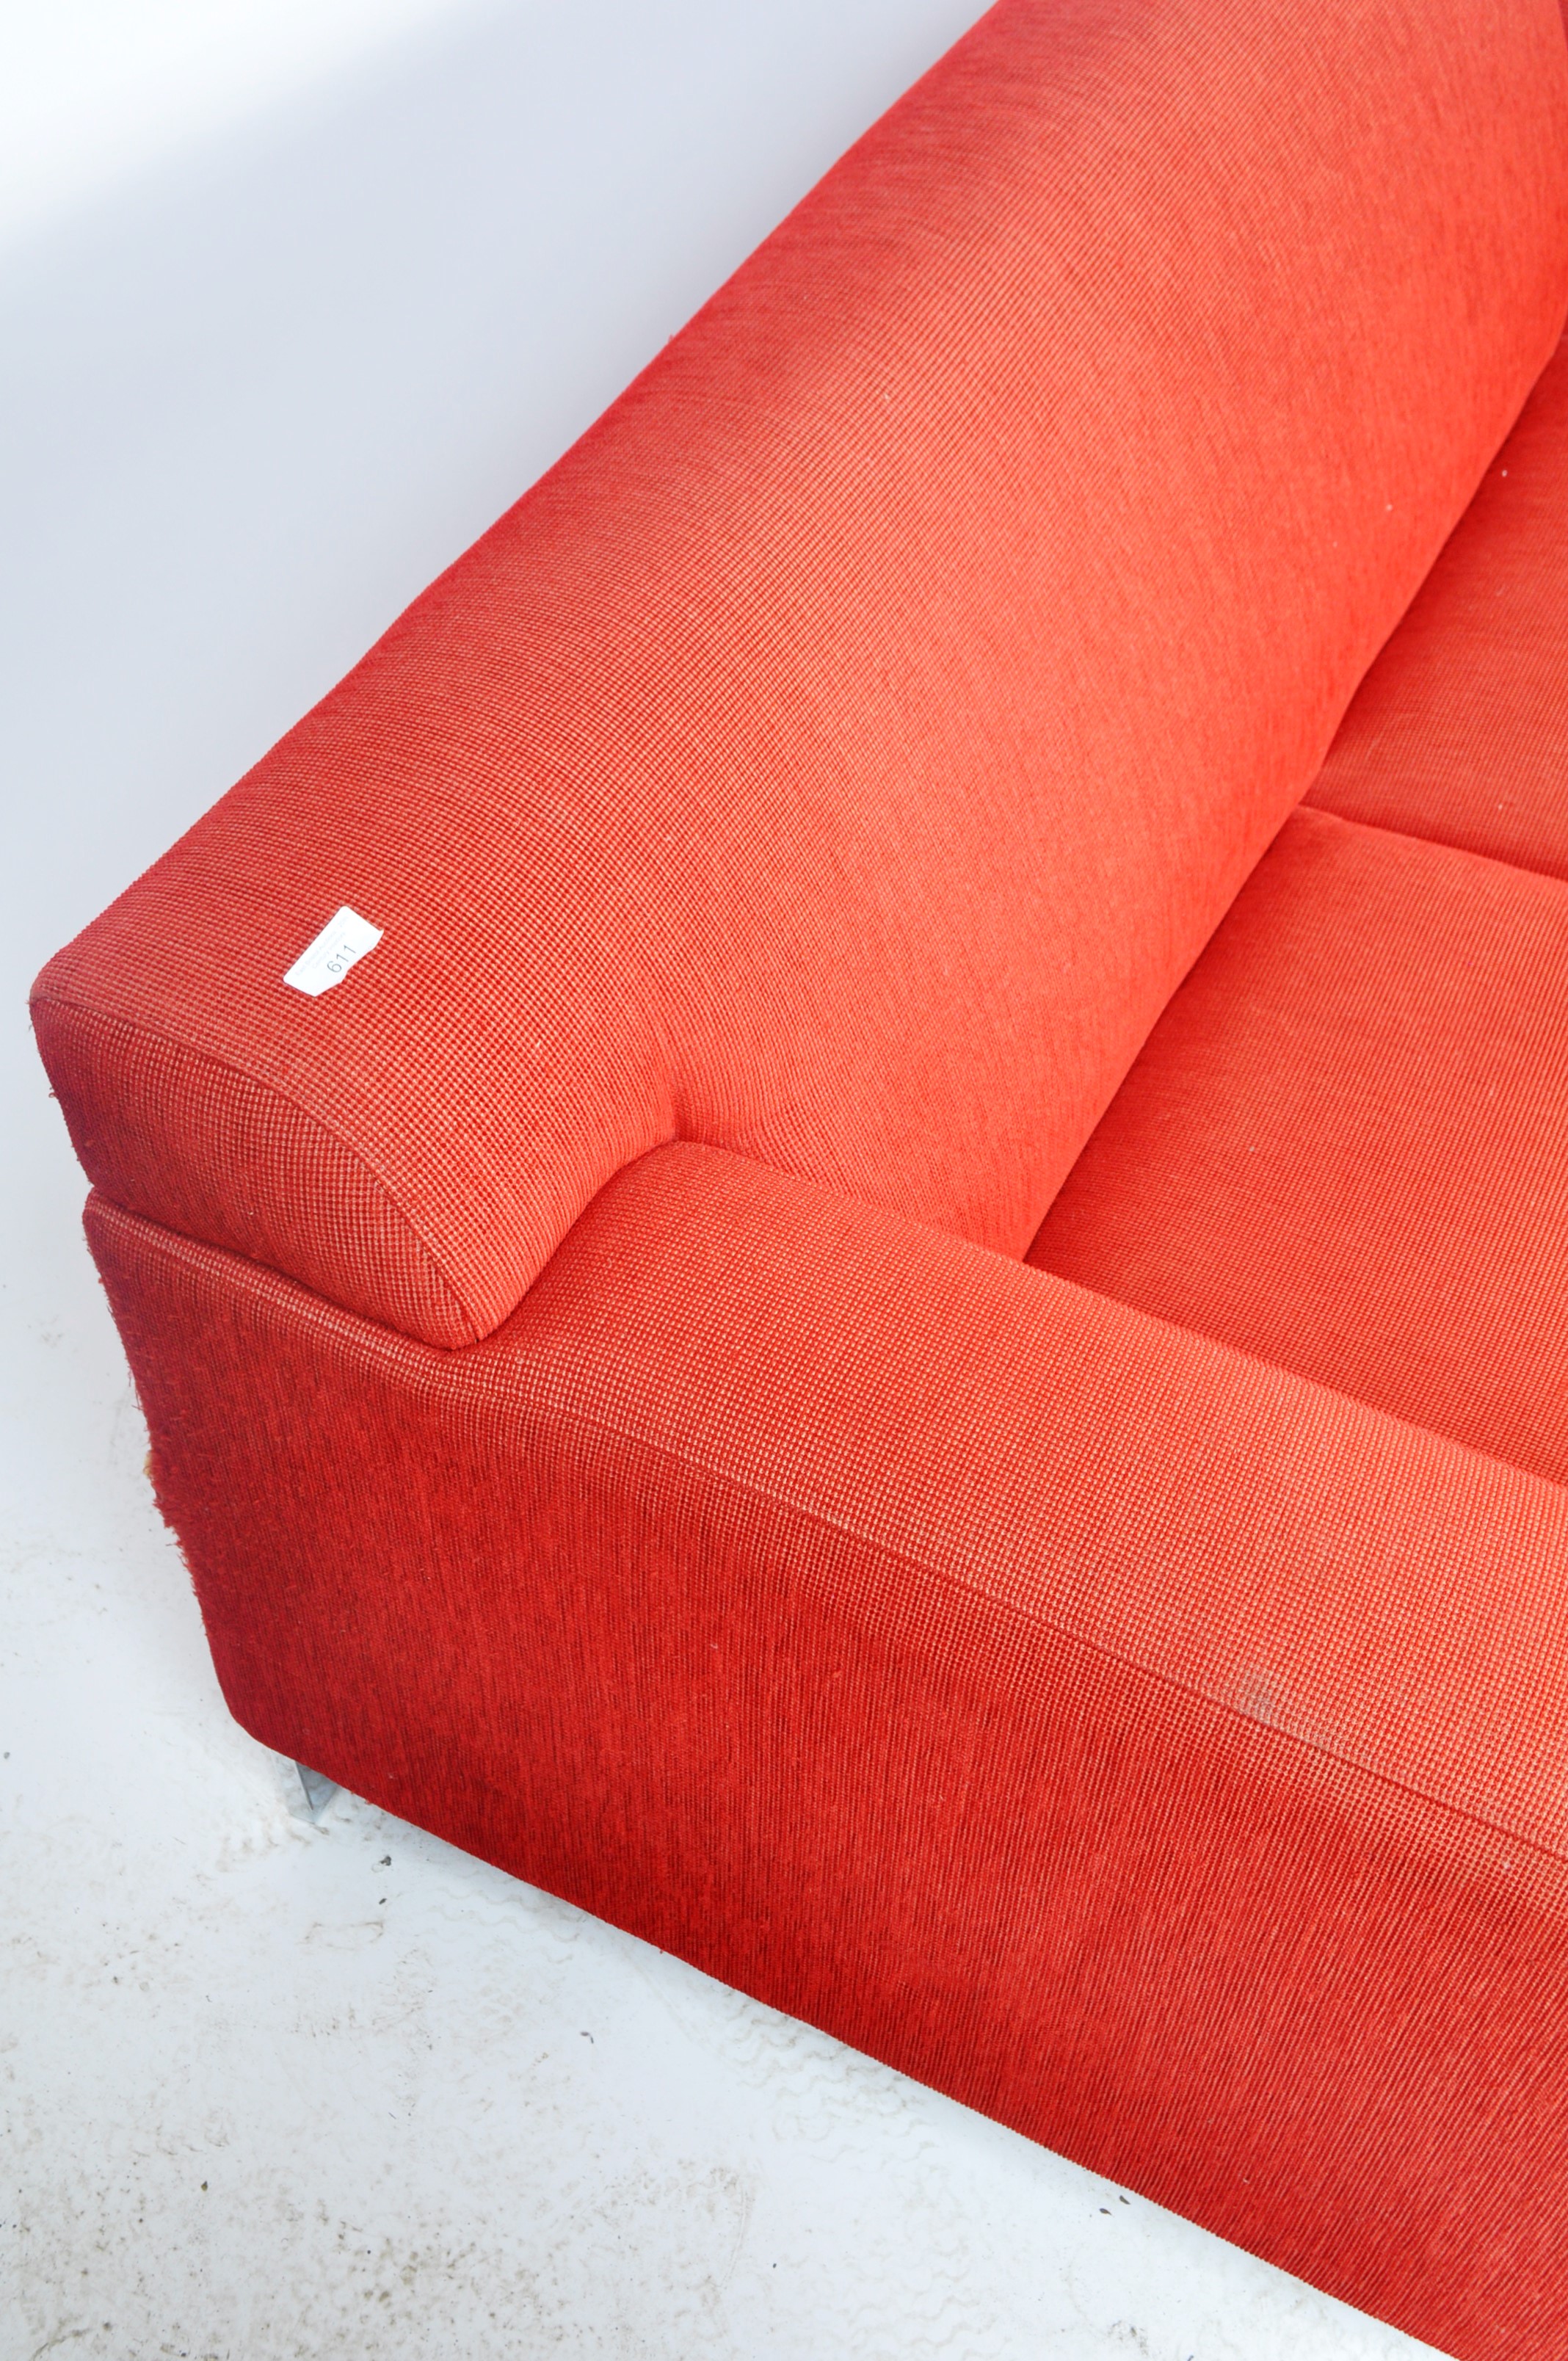 SITS MADE CONTEMPORARY RED FABRIC TWO SEATER SOFA - Image 4 of 8